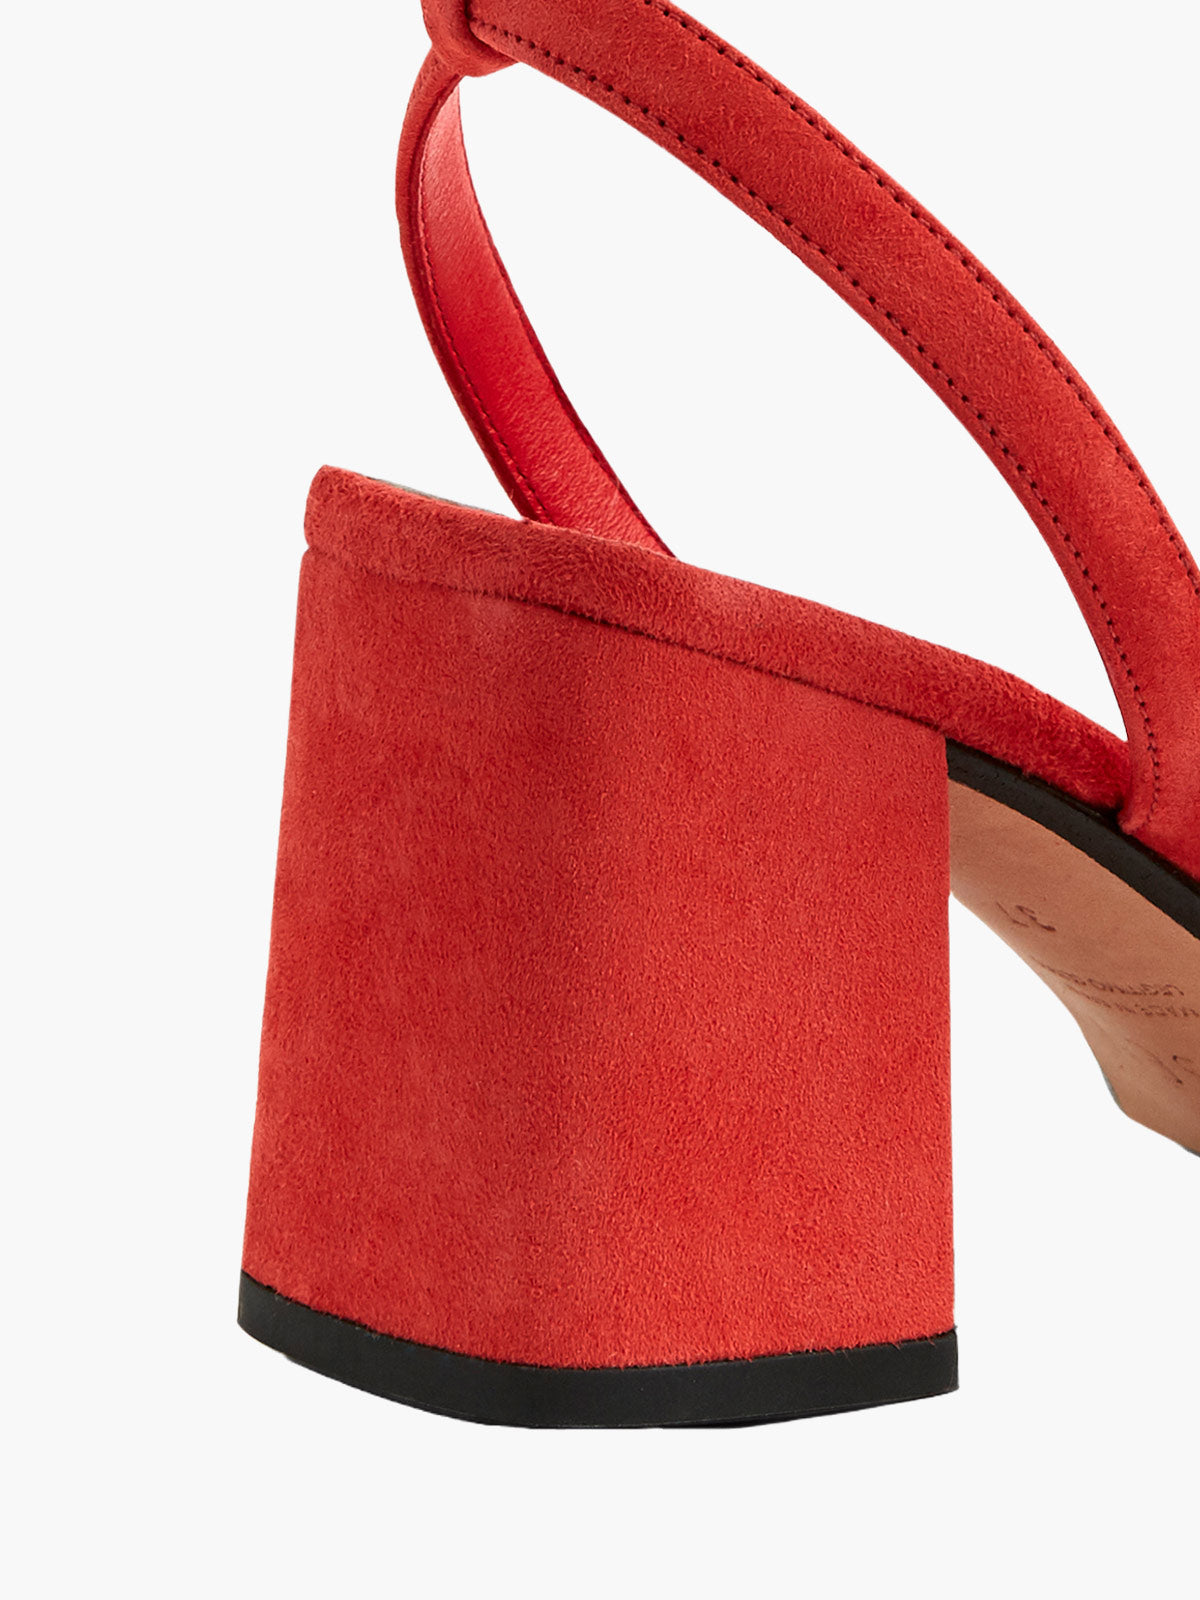 The Elevated Essential | Red Suede The Elevated Essential | Red Suede